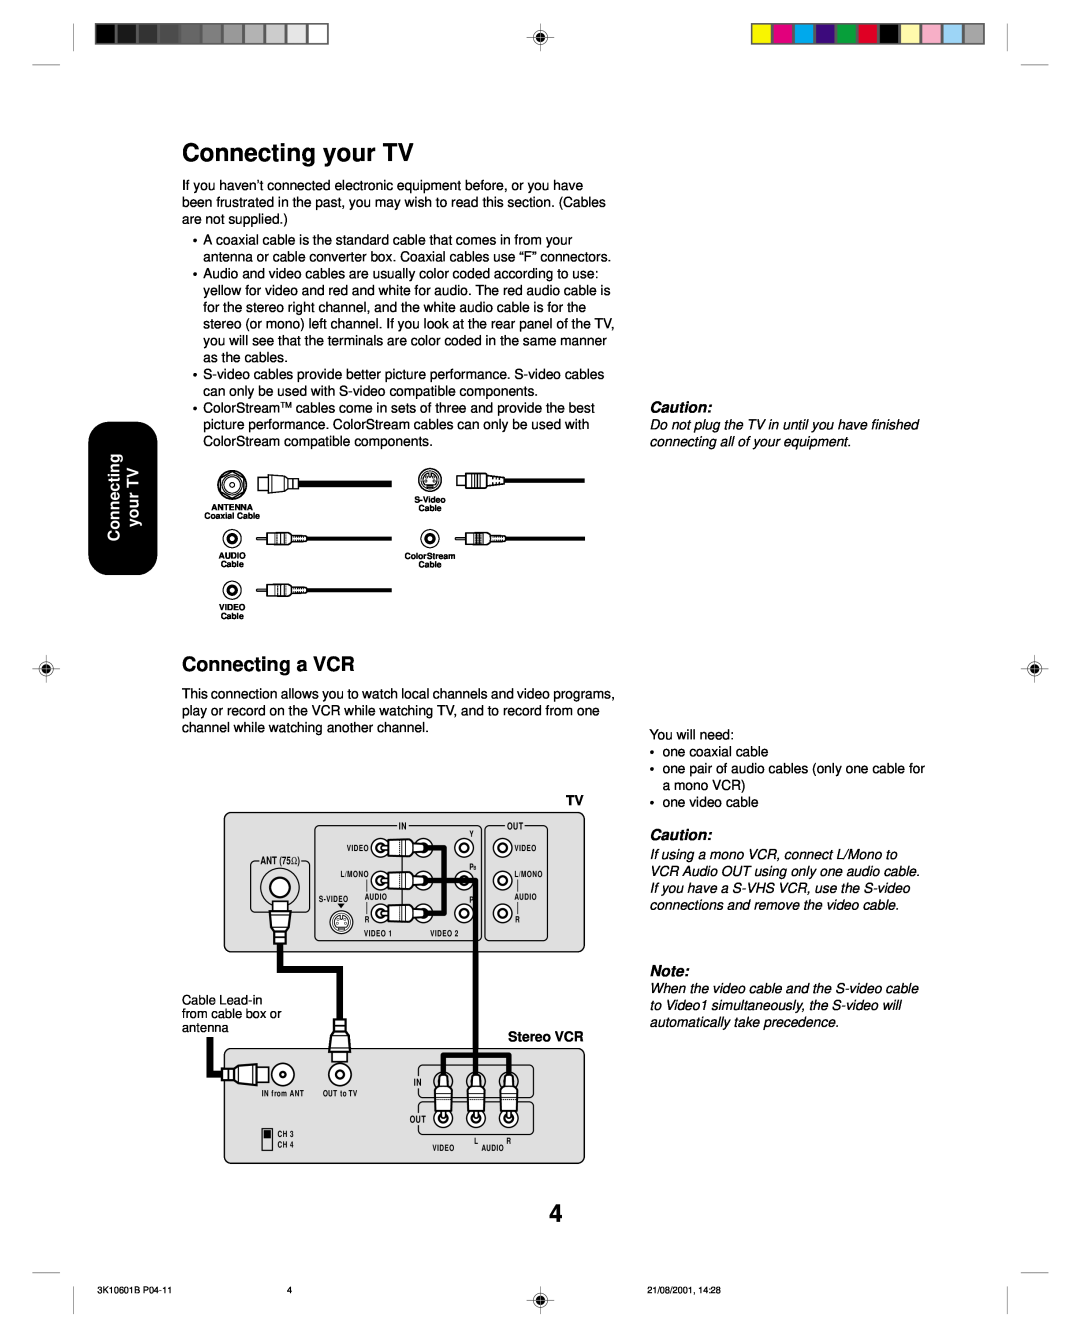 Toshiba 27A41 appendix Connecting your TV, Connecting a VCR, connecting all of your equipment, Stereo VCR 